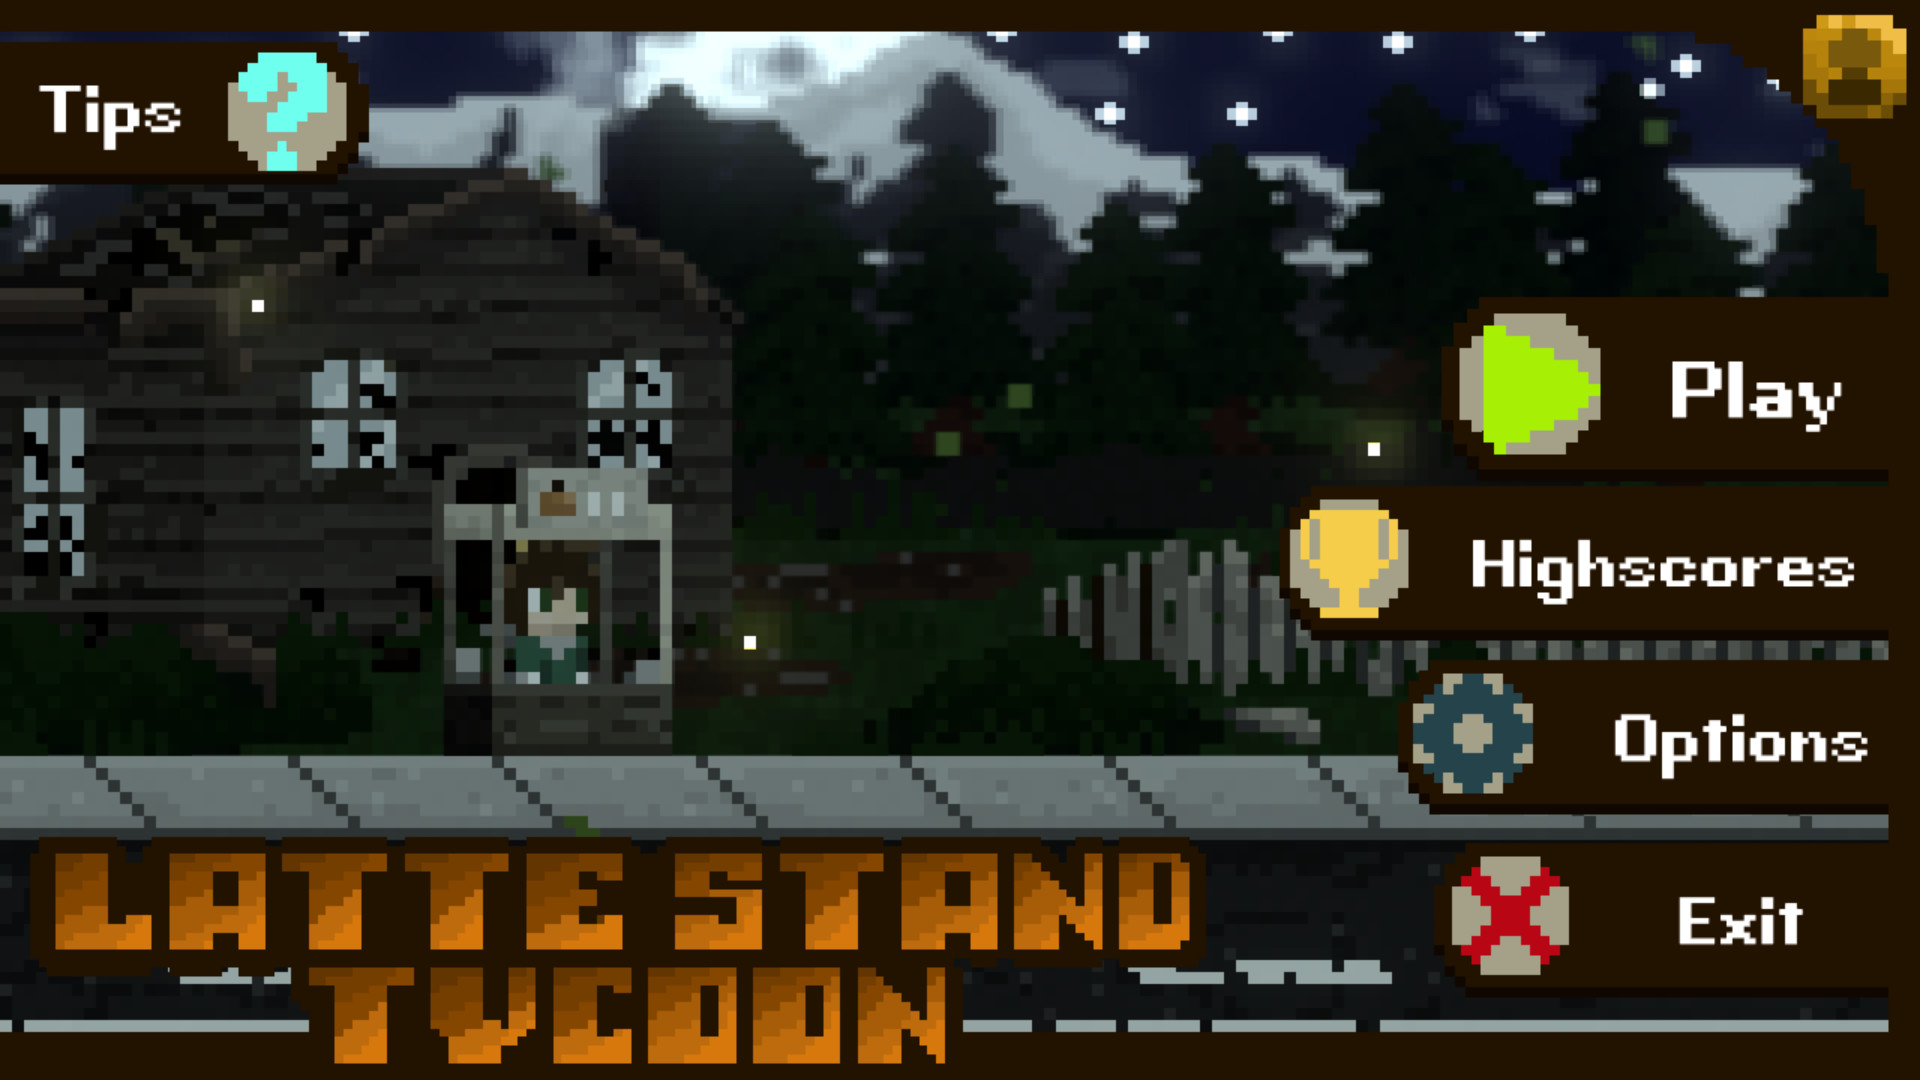 Latte Stand Tycoon Steam CD Key 0.7 $